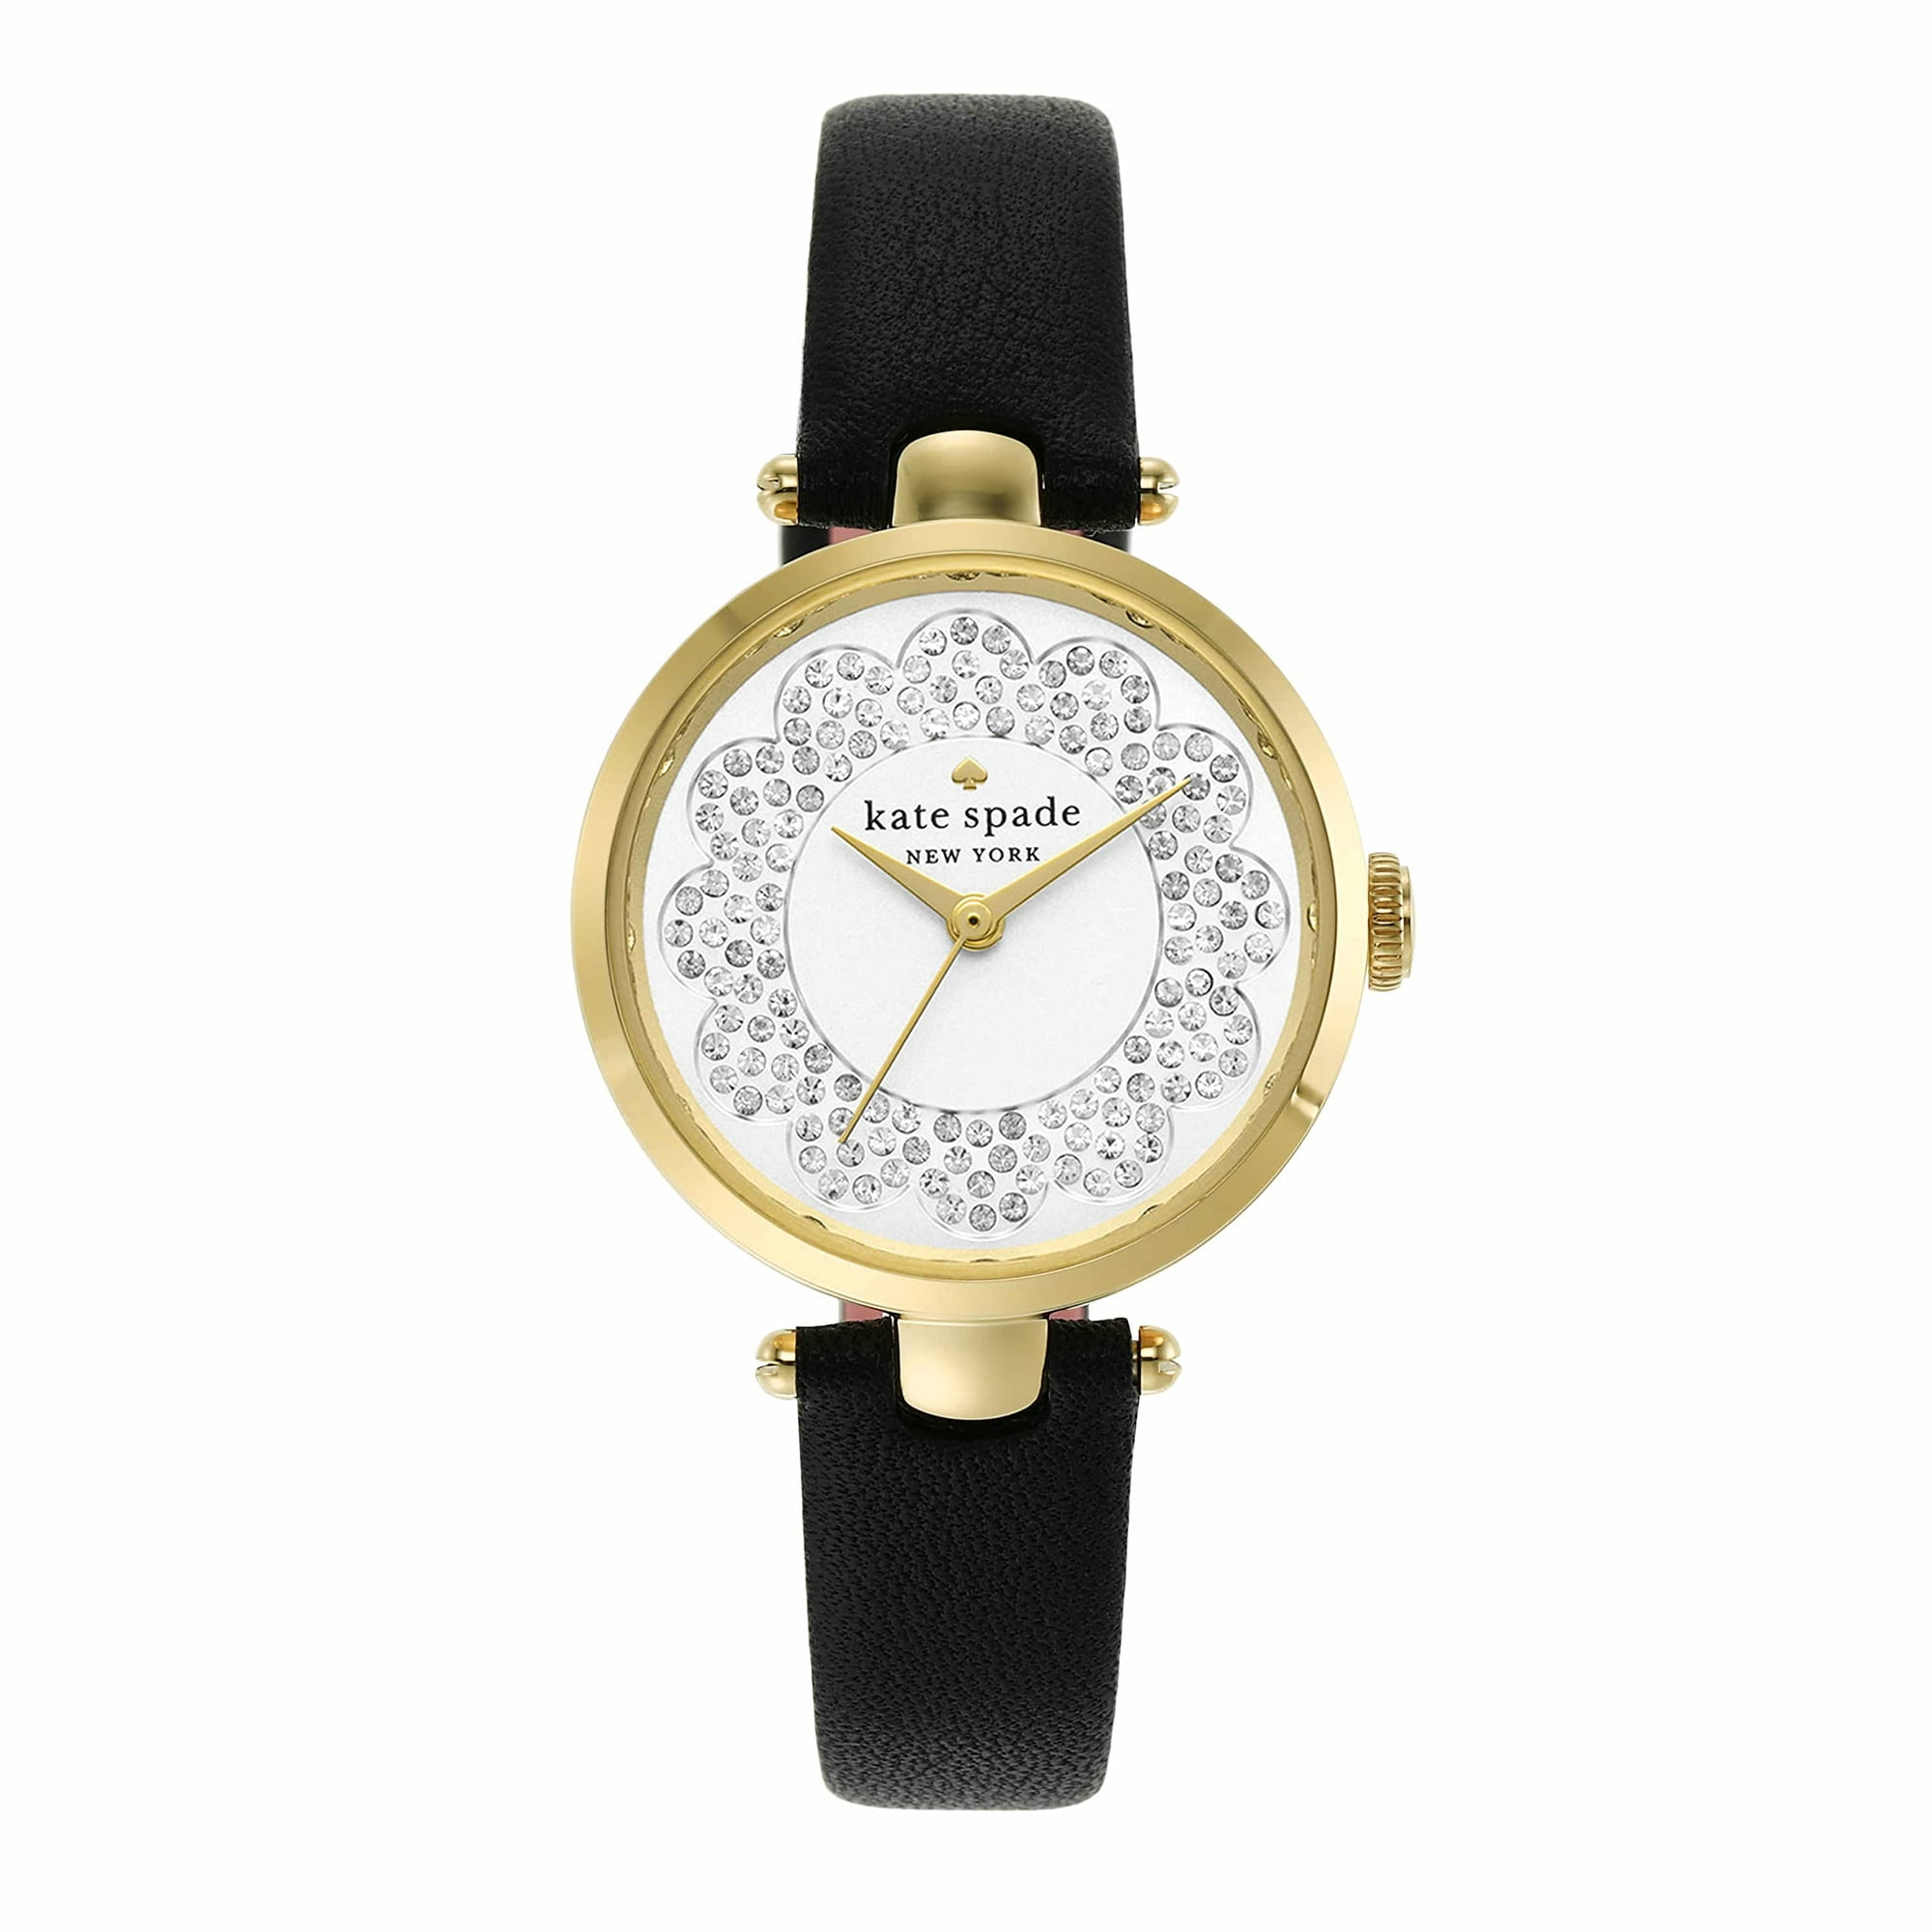 kate spade new york Women's Holland Stainless Steel Quartz Watch with Leather  Strap, Black, 10 (Model: KSW1739) | Walmart Canada